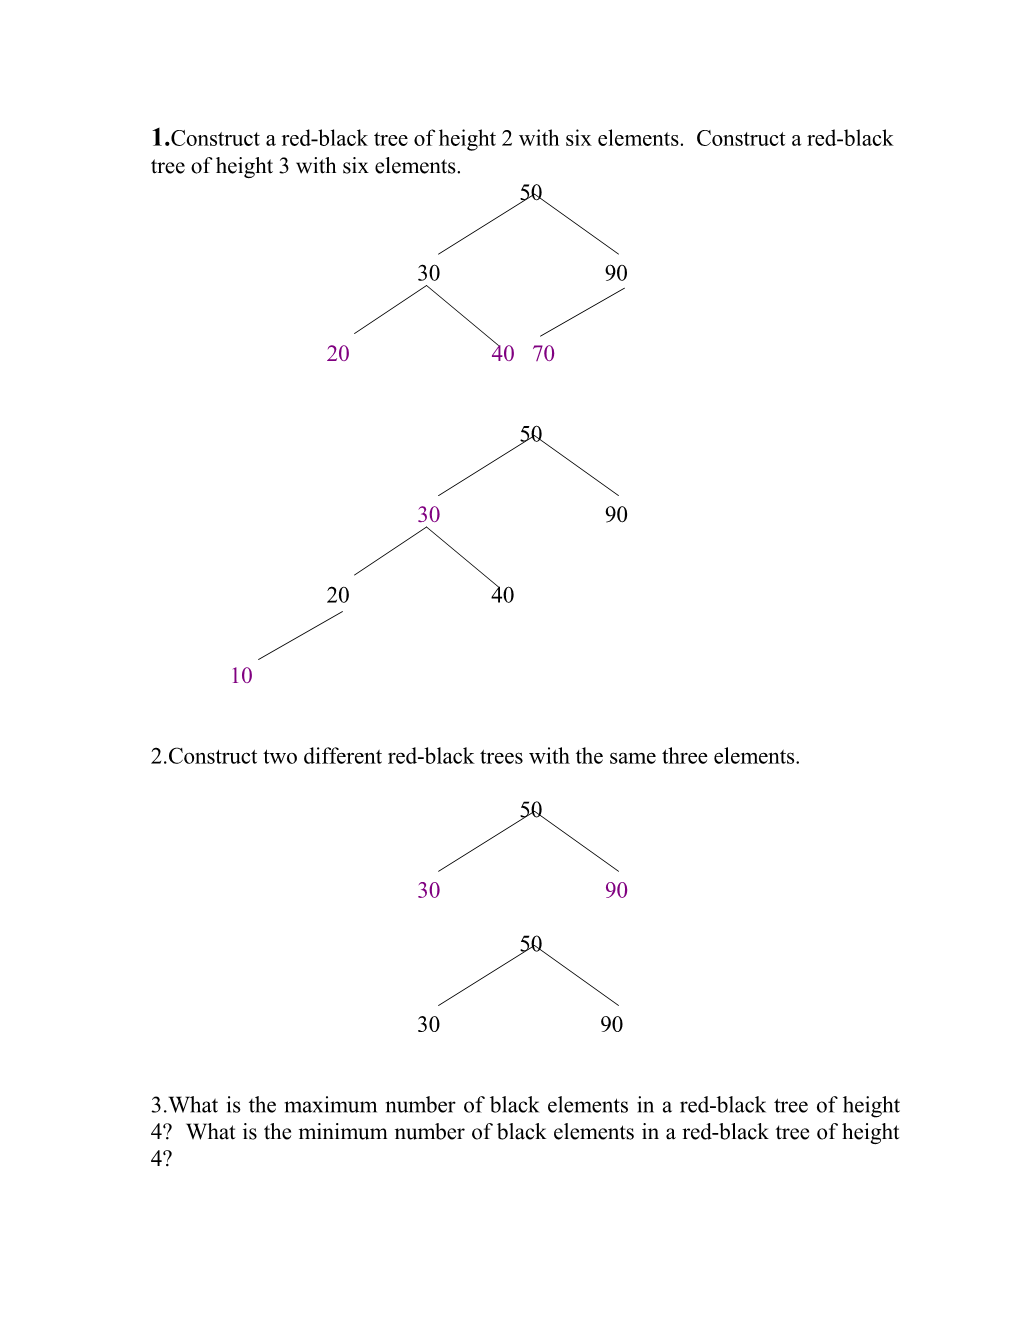 2.Construct Two Different Red-Black Trees with the Same Three Elements